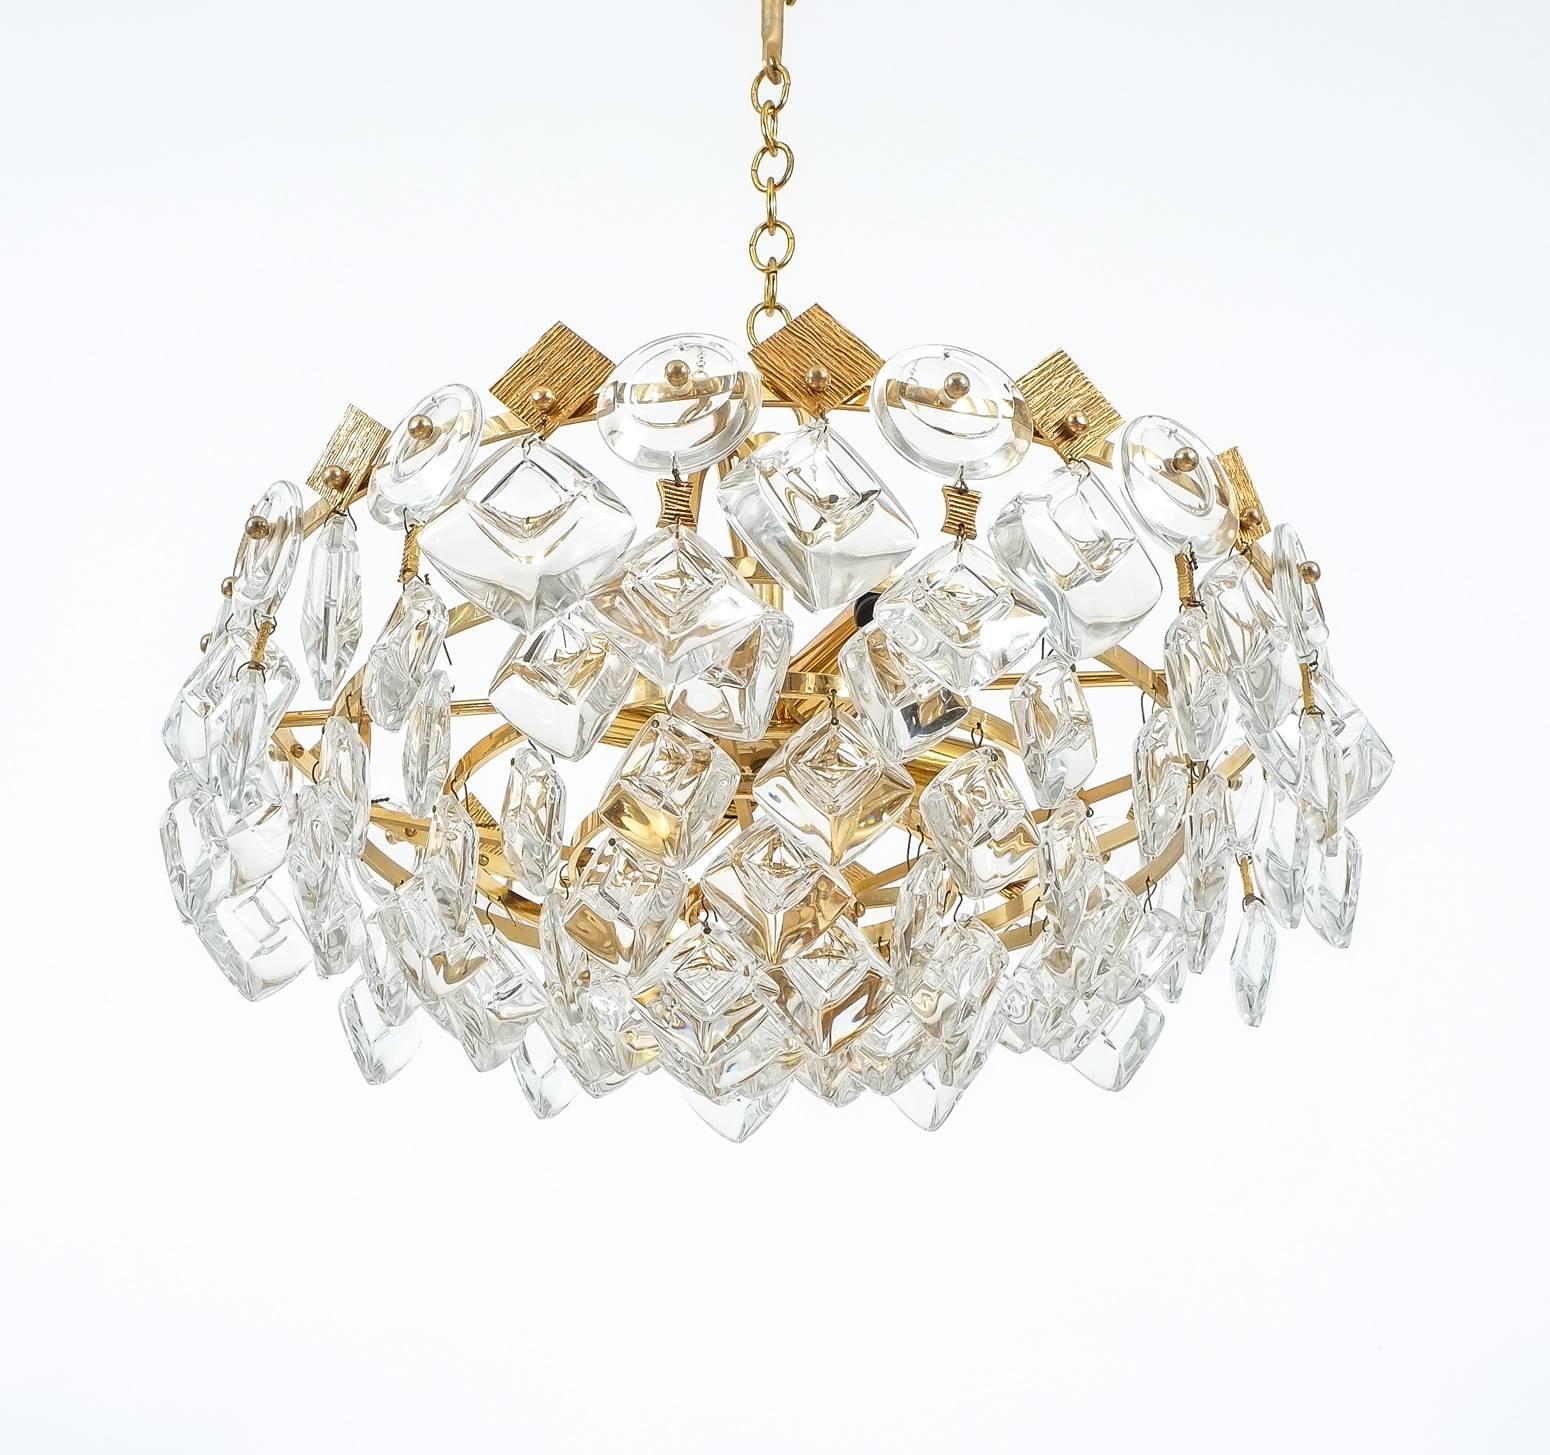 German Petite Gilded Brass and Glass Chandelier Lamp by Palwa, 1970 For Sale